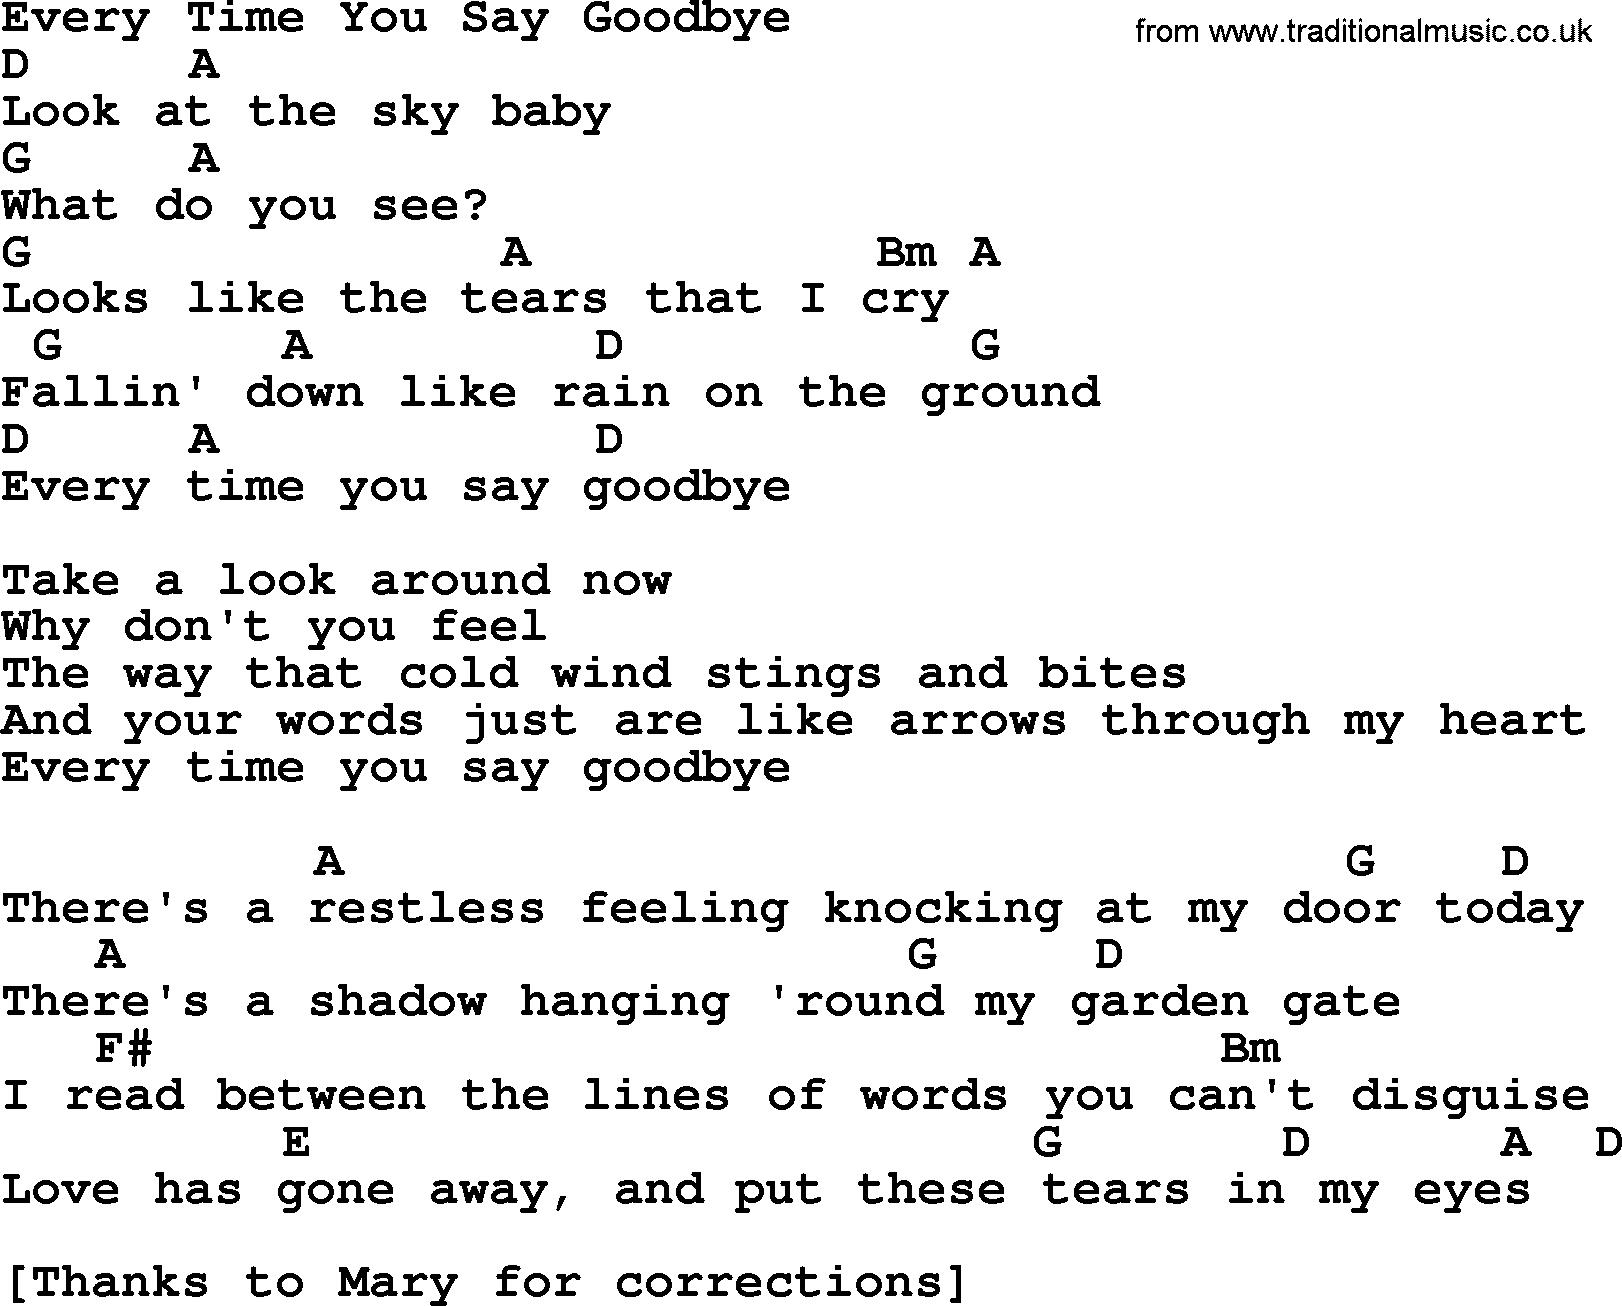 Bluegrass song: Every Time You Say Goodbye, lyrics and chords